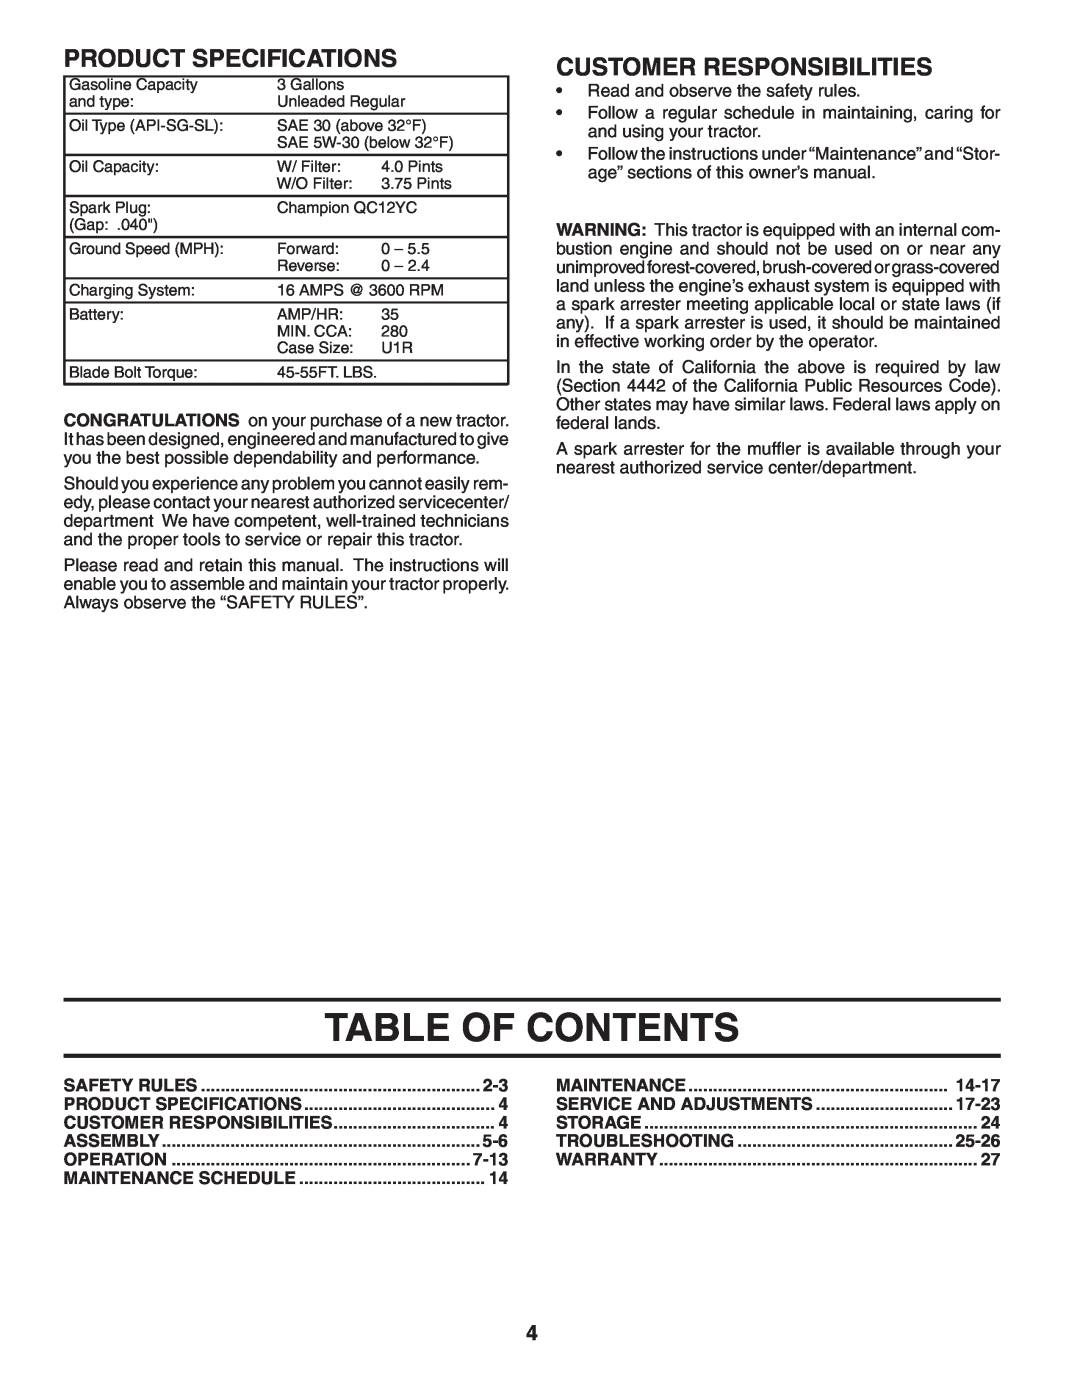 Poulan XT22H48YT manual Table Of Contents, Product Specifications, Customer Responsibilities, 7-13, 14-17, 17-23, 25-26 